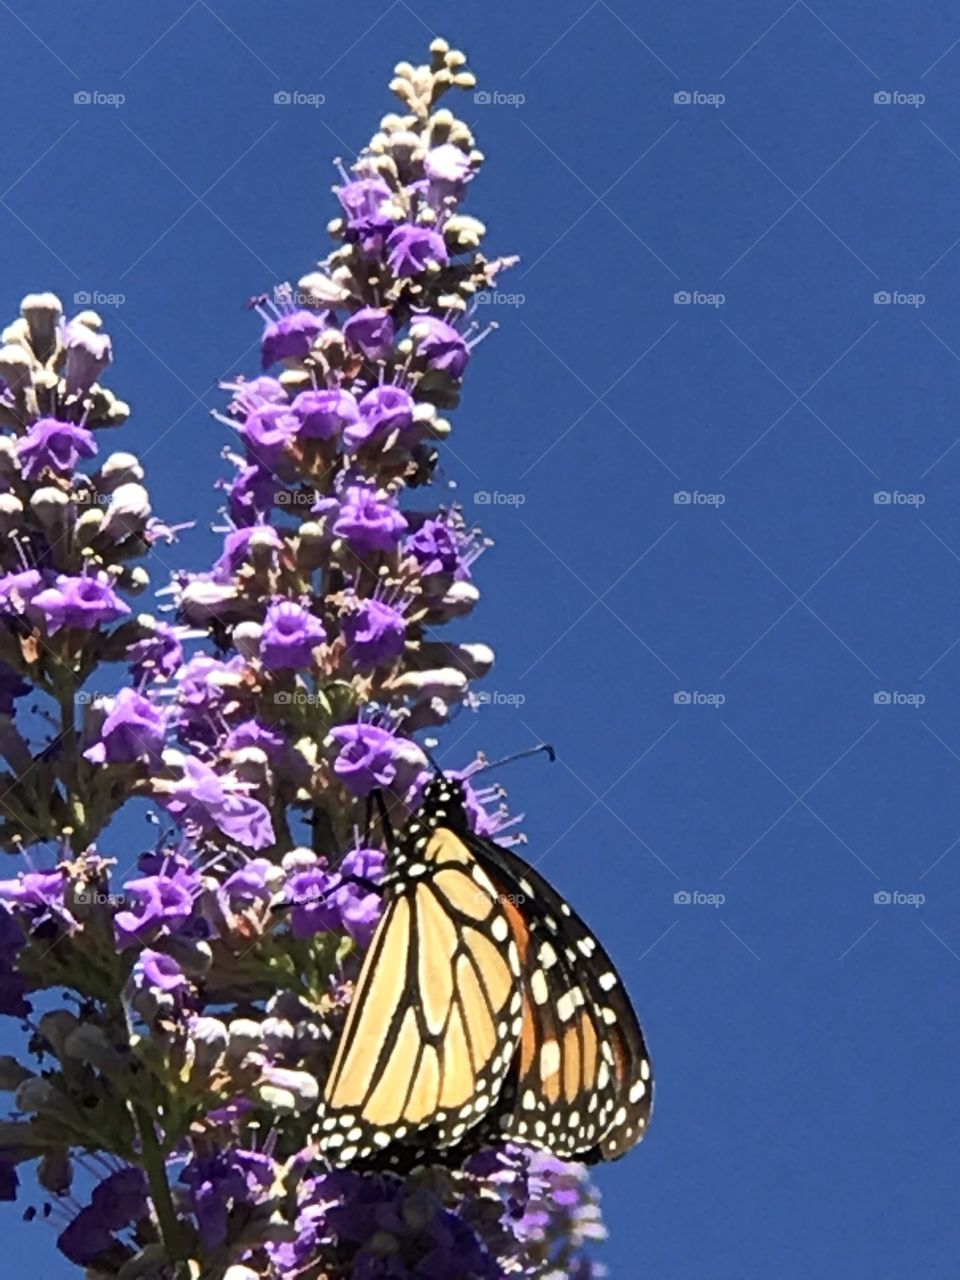 Texas Lilac and butterflies 